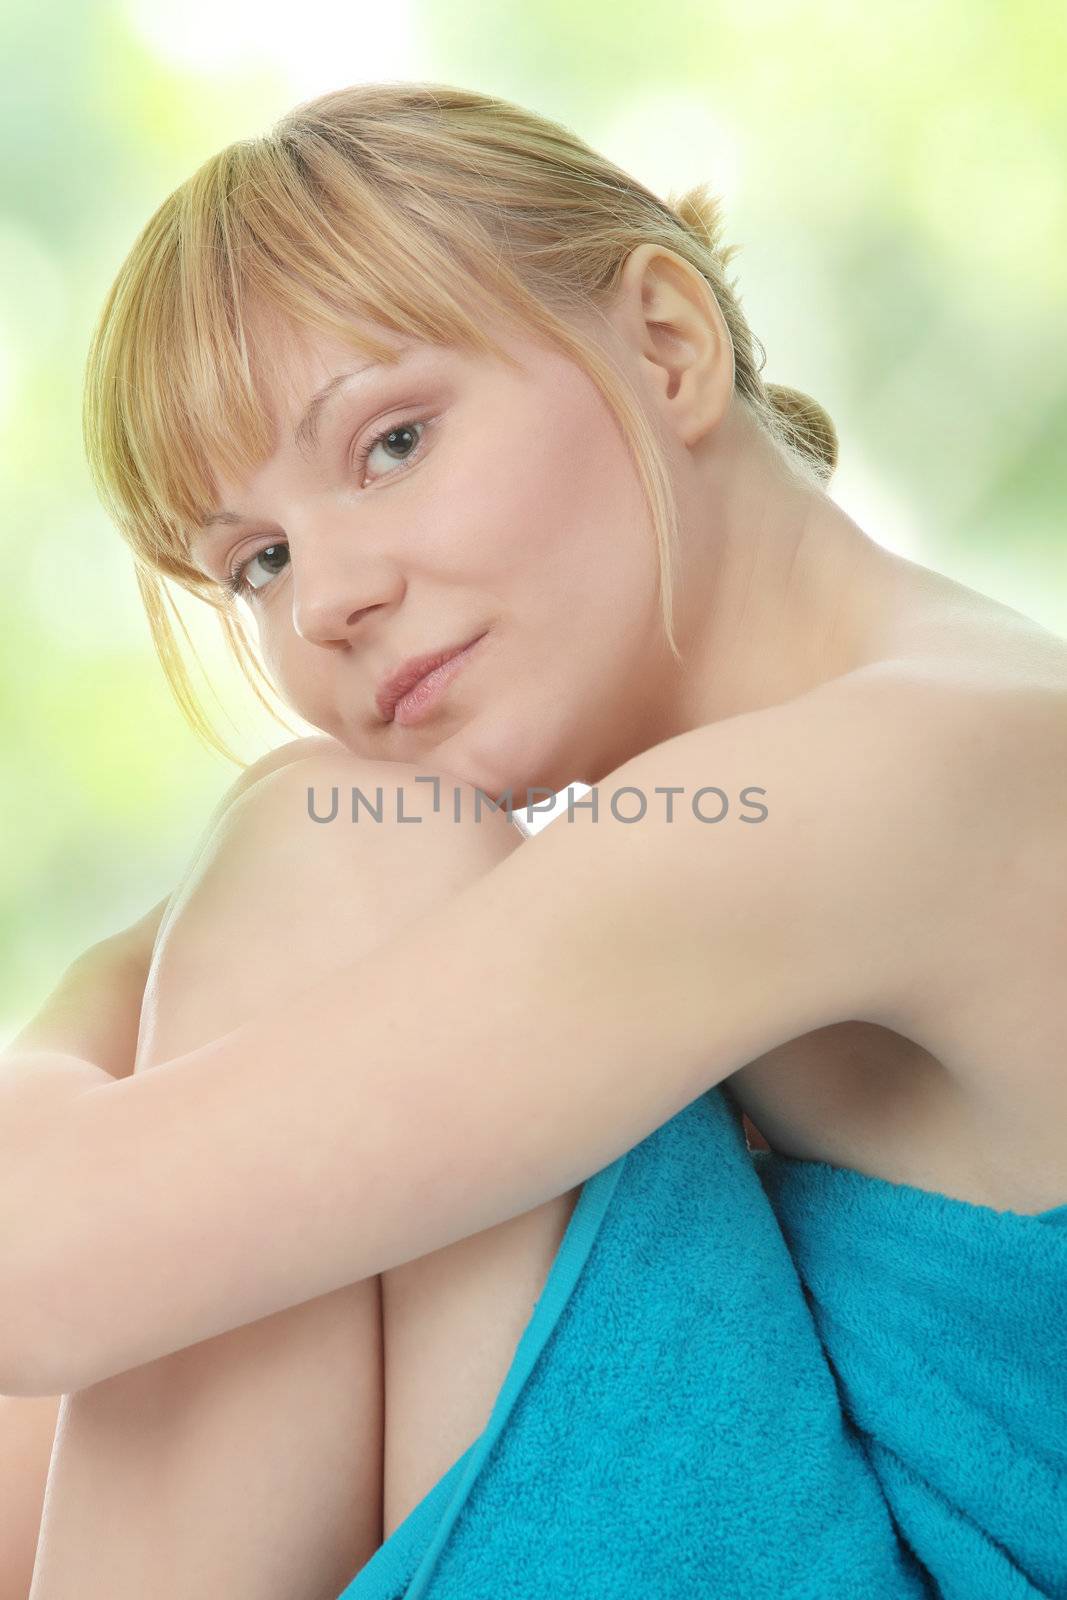 Attractive young nude woman getting ready for spa treatment, against abstract green background